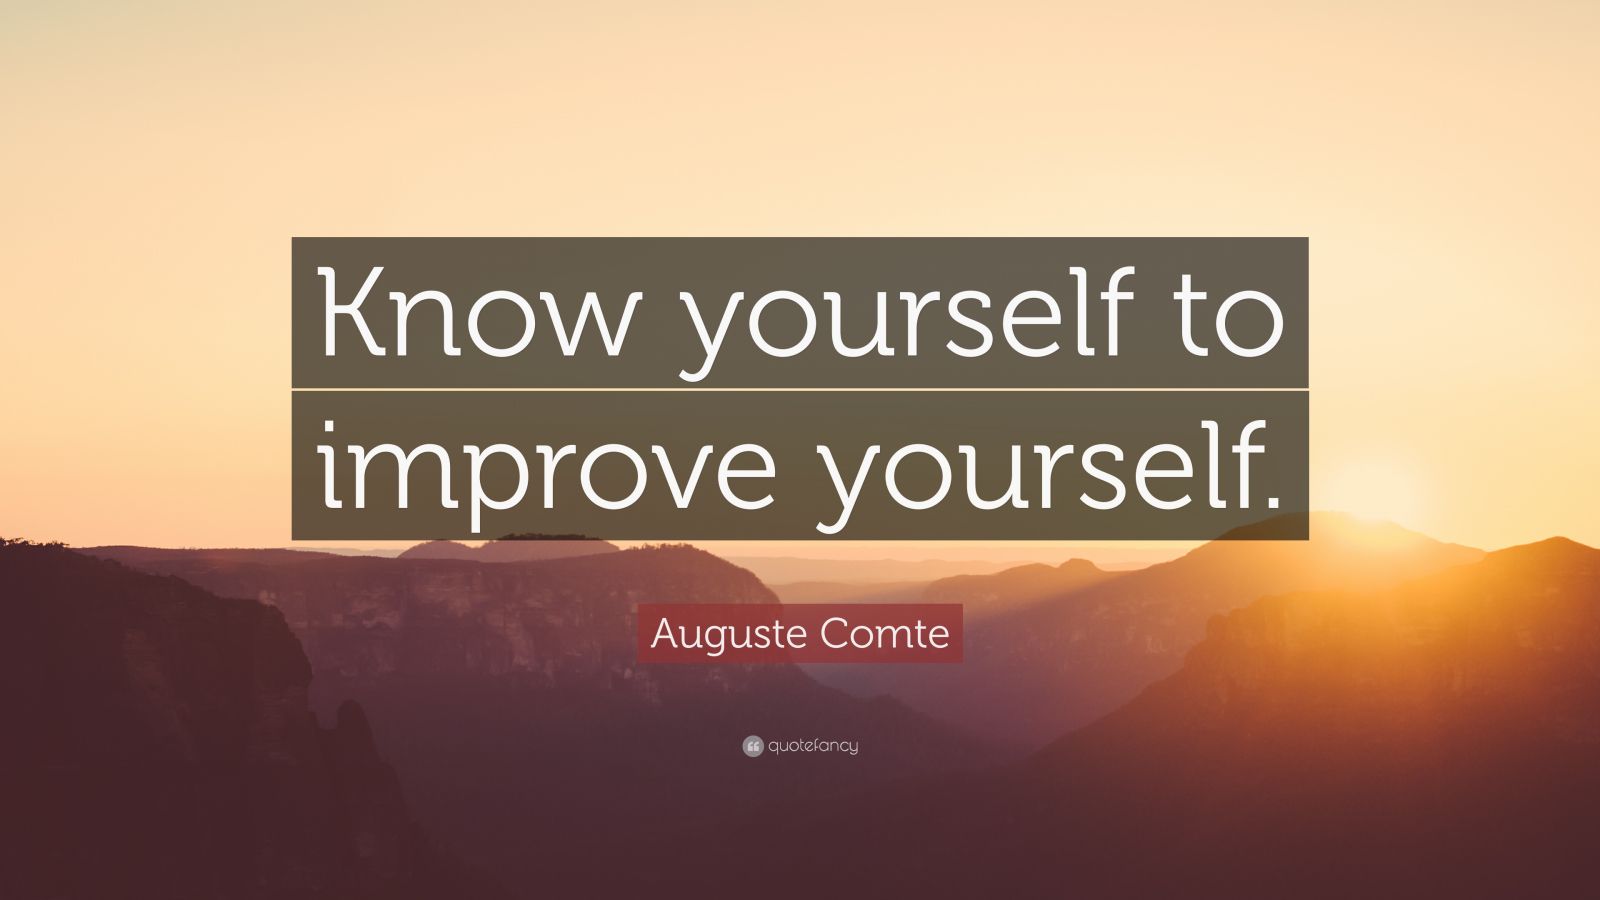 Auguste Comte Quote “know Yourself To Improve Yourself” 12